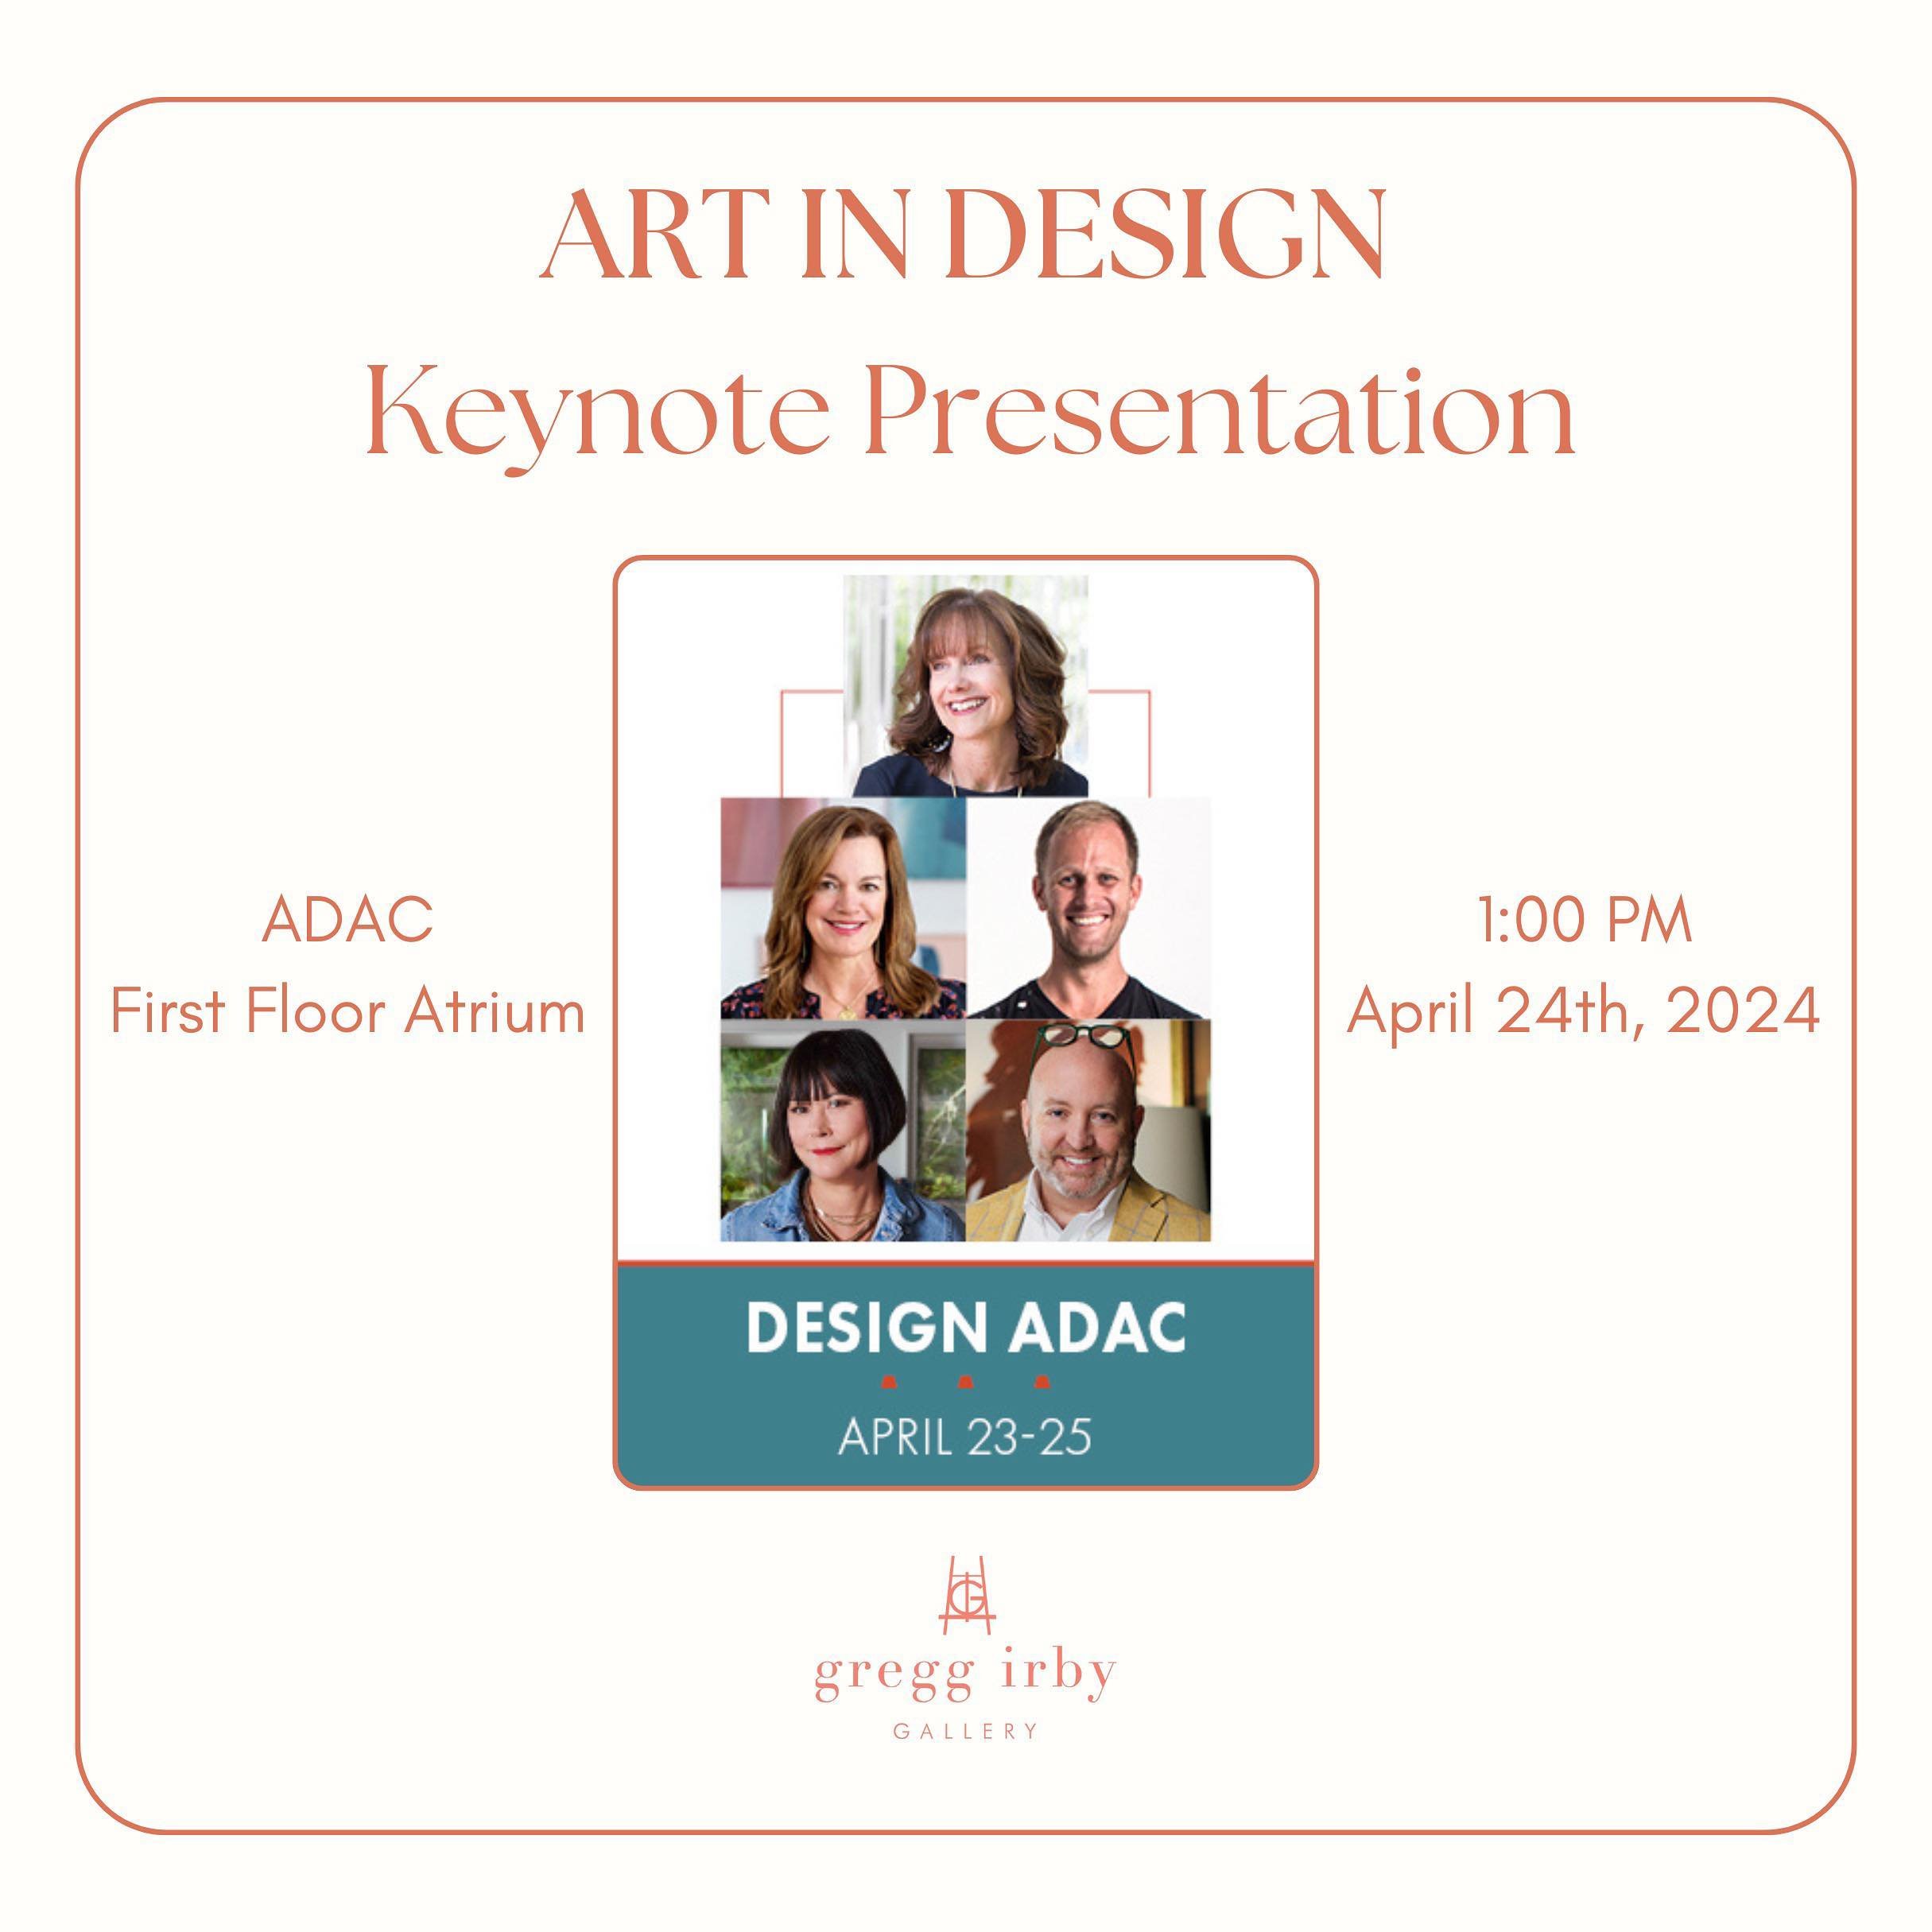 One week until the ADAC Design Panel! 

Join our gallery owner Gregg Irby, along with Atlanta Magazine&rsquo;s HOME editor Betsy Riley, artist Charlie Hanavich, and designers Jessica Davis and Roger Higgins to explore the fundamental role art plays i